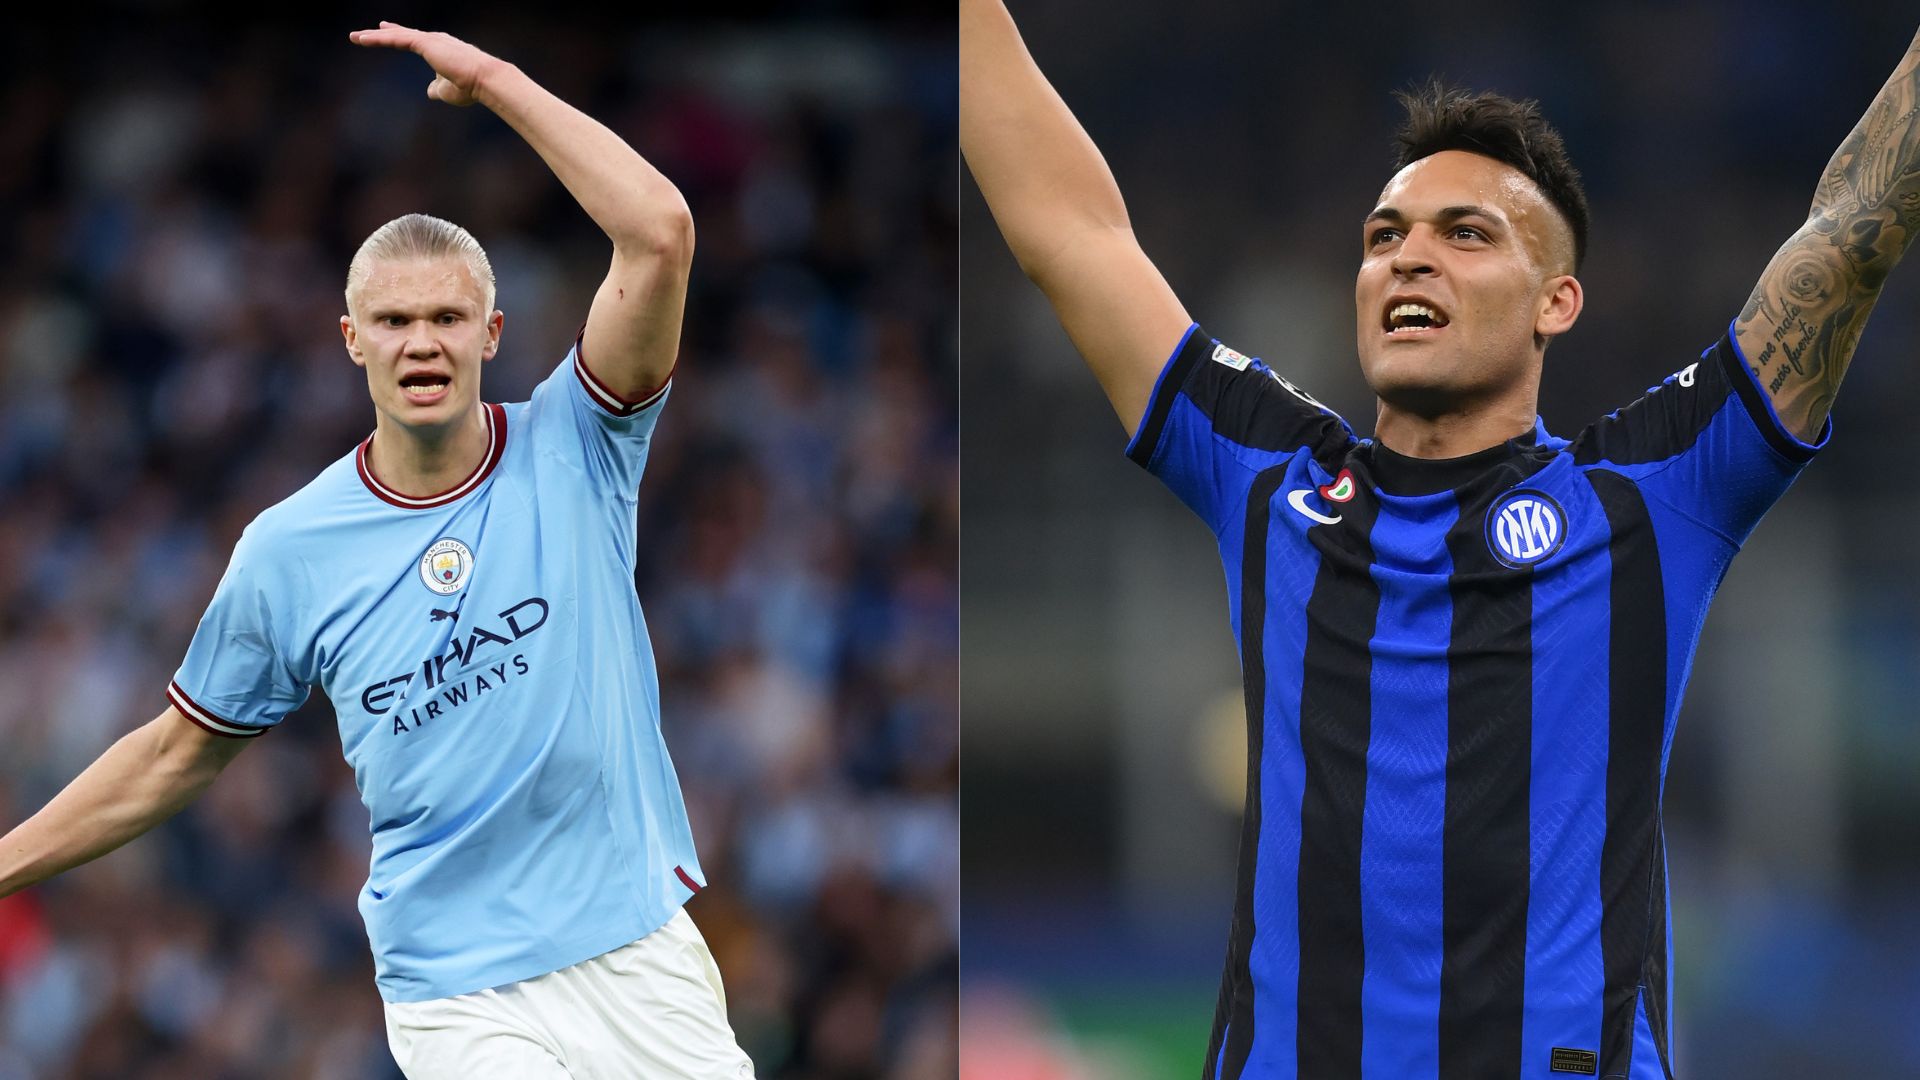 City v Inter will be the Champions League final